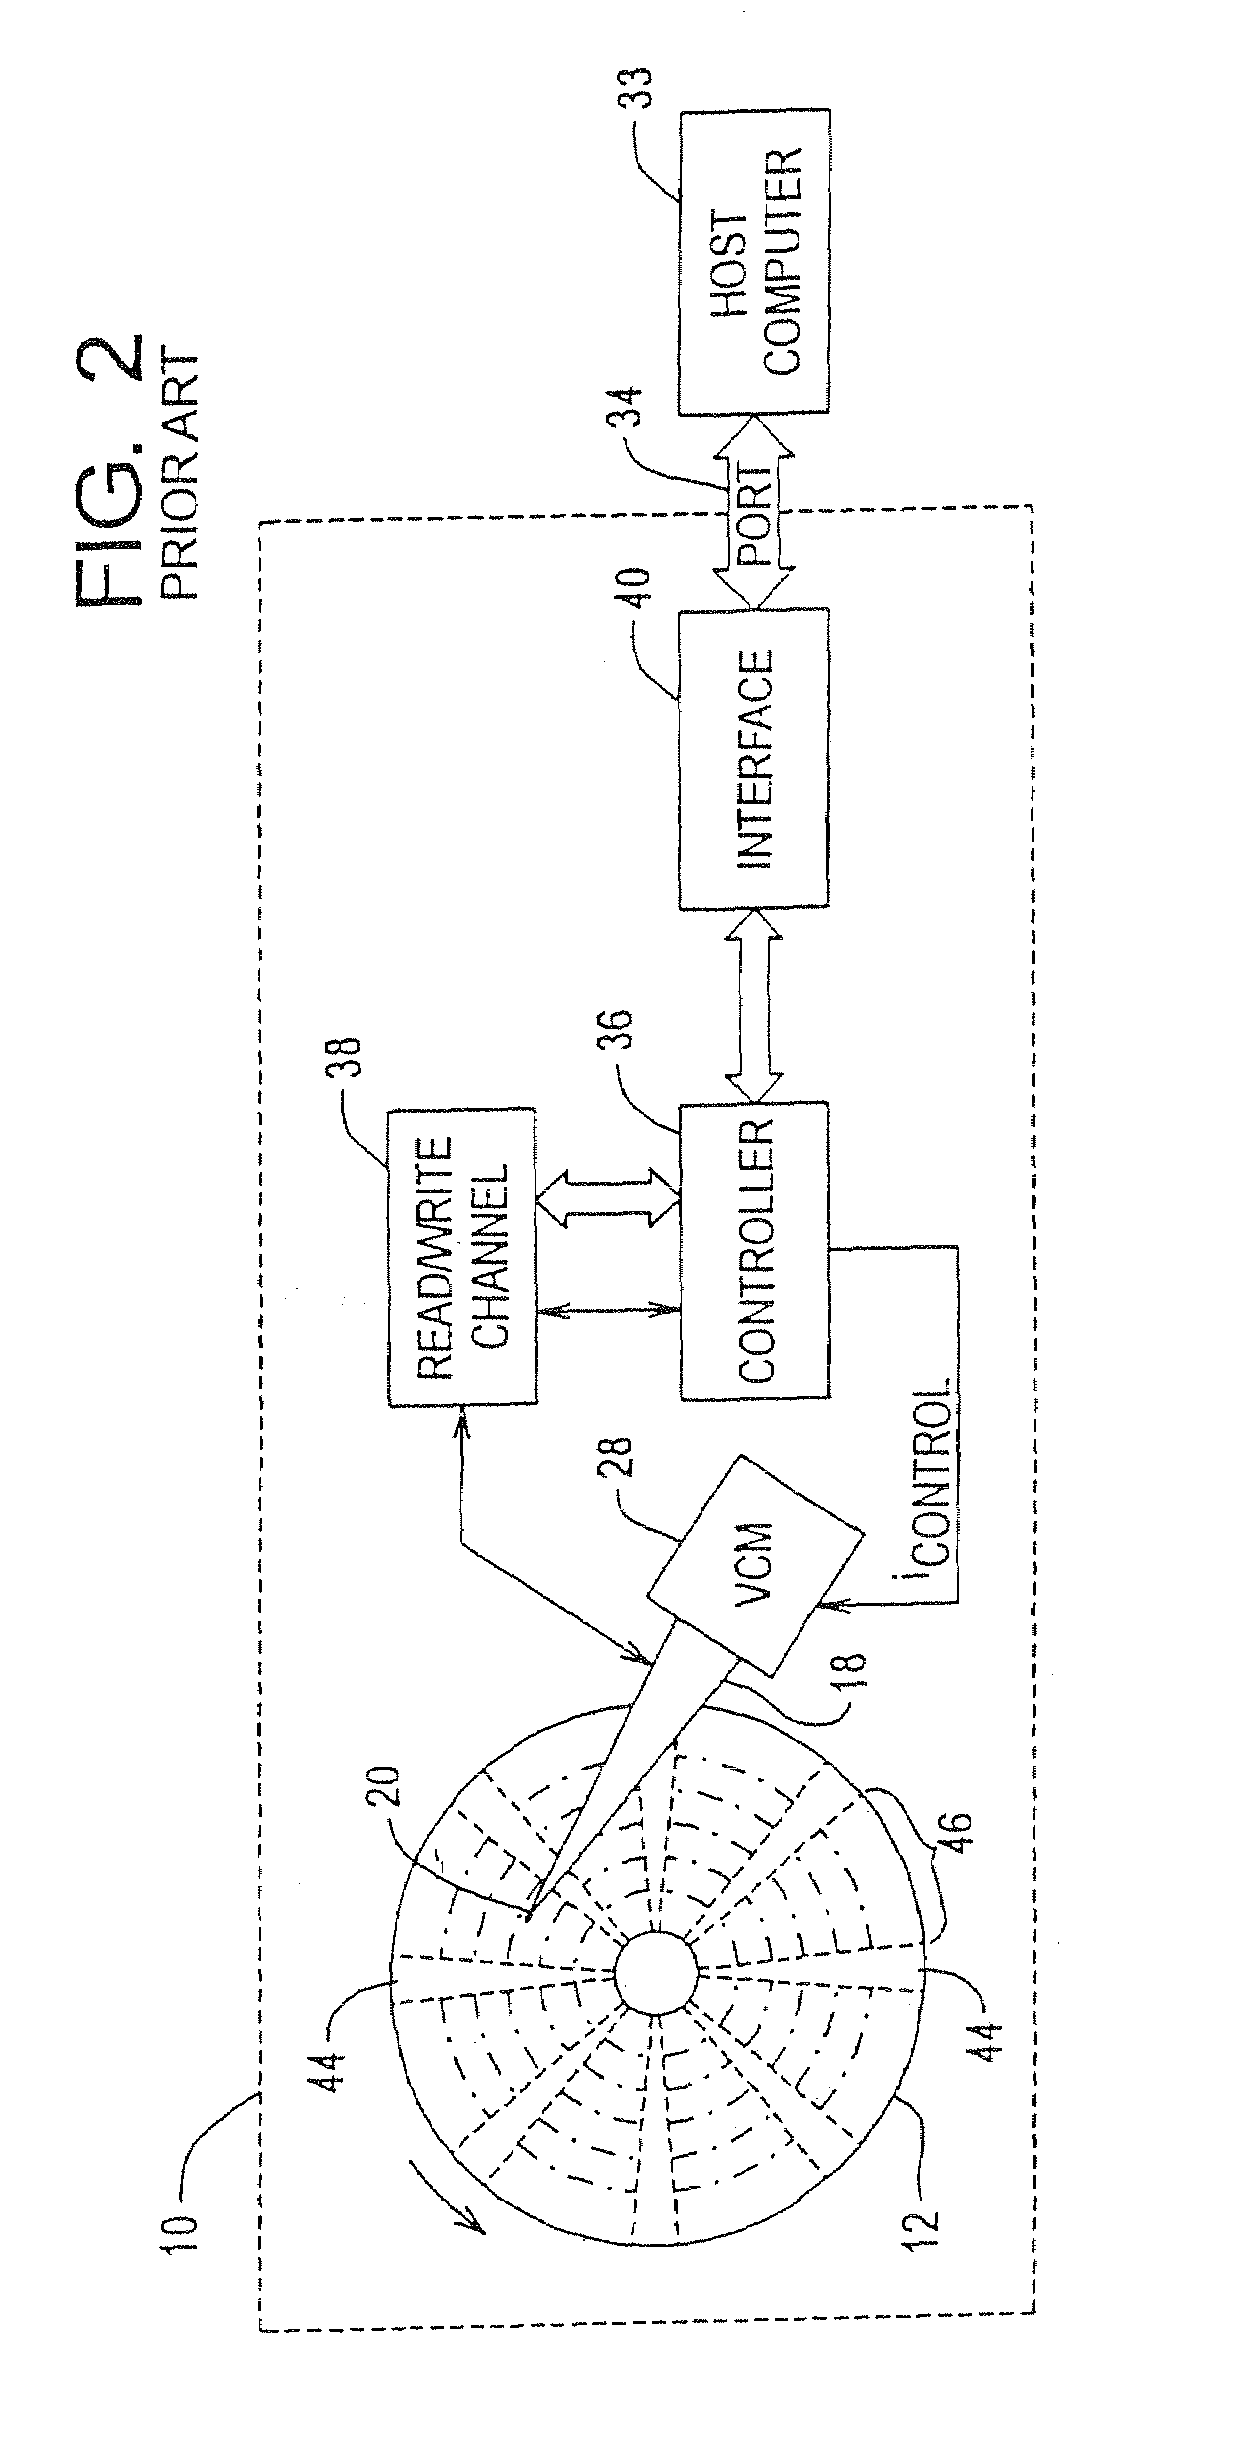 Method and apparatus for performing a self-servo write operation in a disk drive using spiral servo information